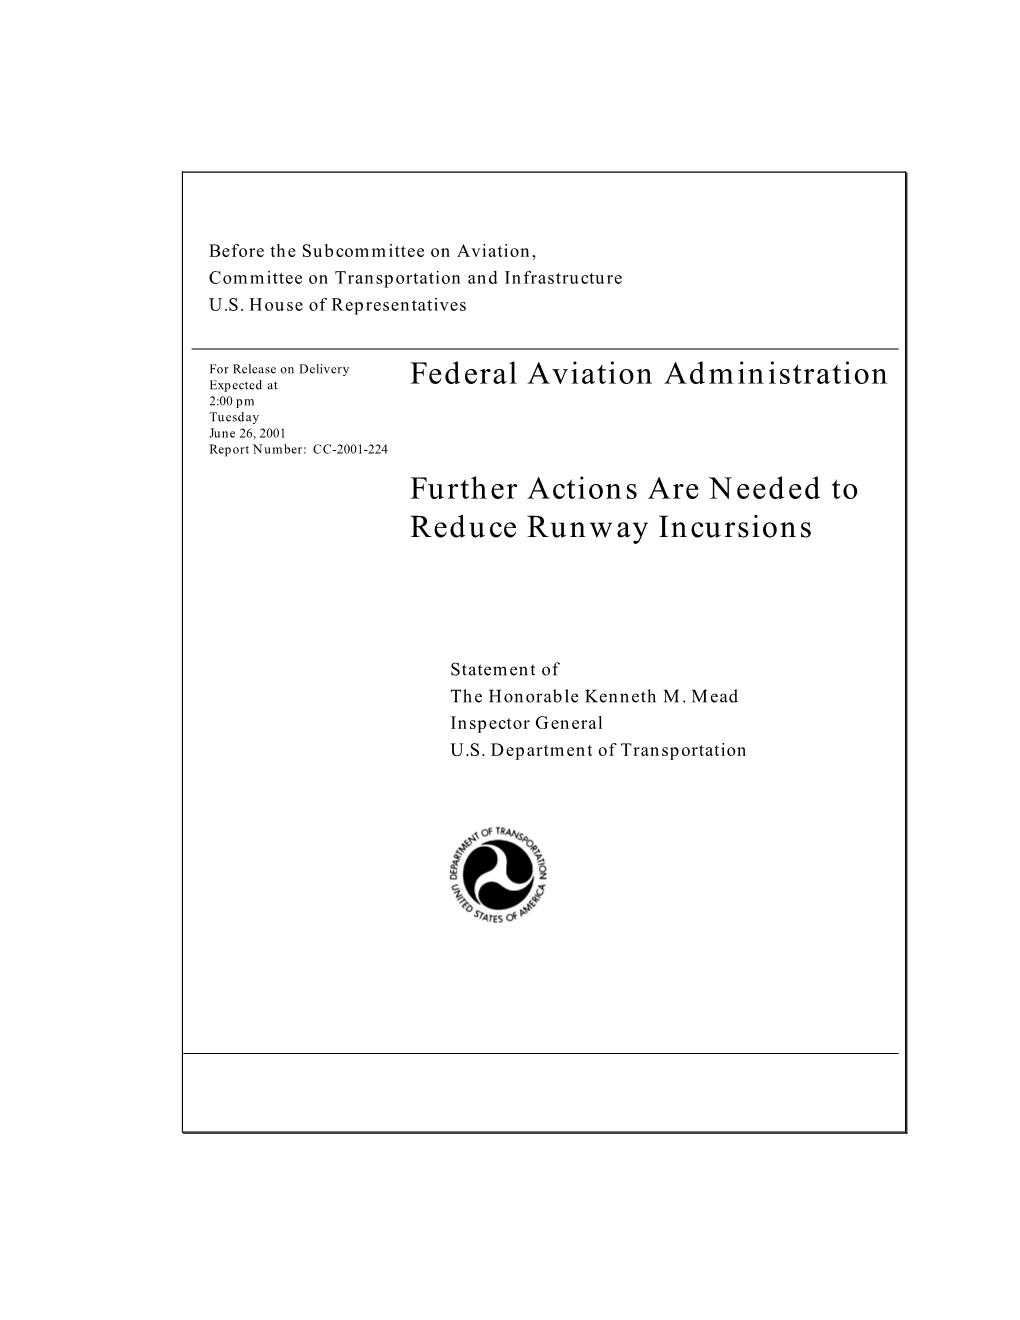 Federal Aviation Administration Further Actions Are Needed to Reduce Runway Incursions